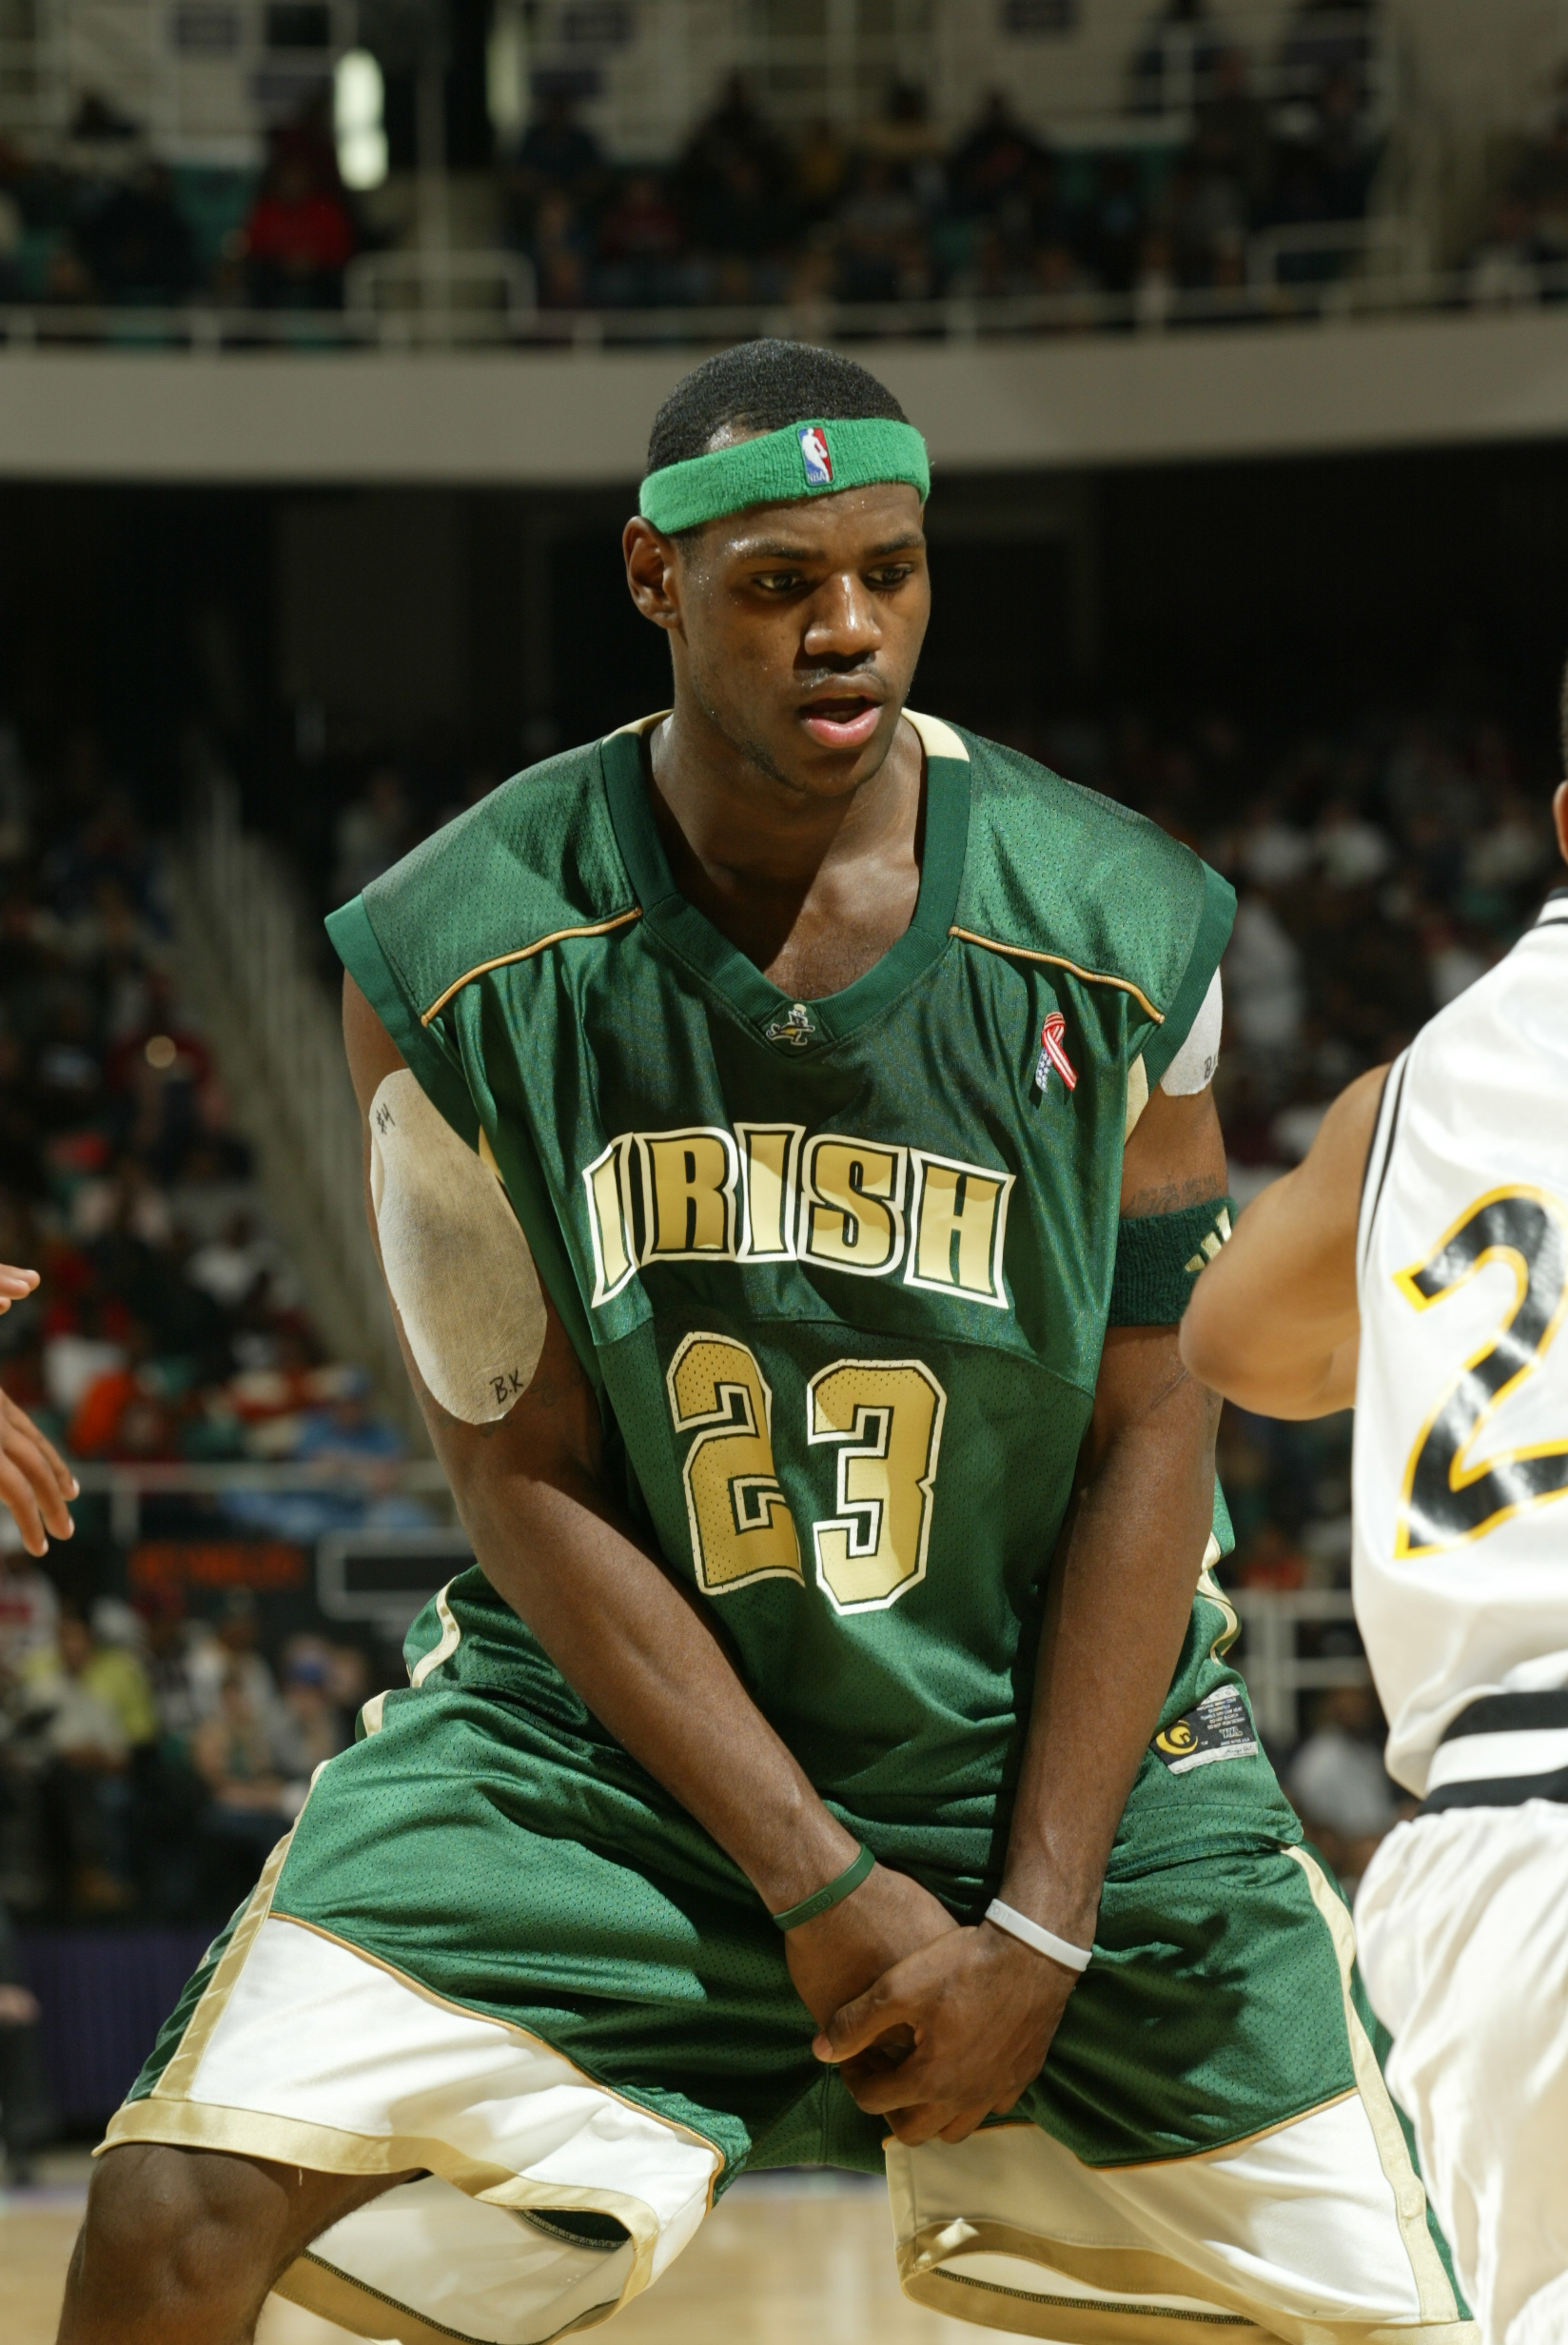 LeBron James during a game between St. Vincent High School and R.J. Reynolds High School on January 15, 2003 | Source: Getty Images